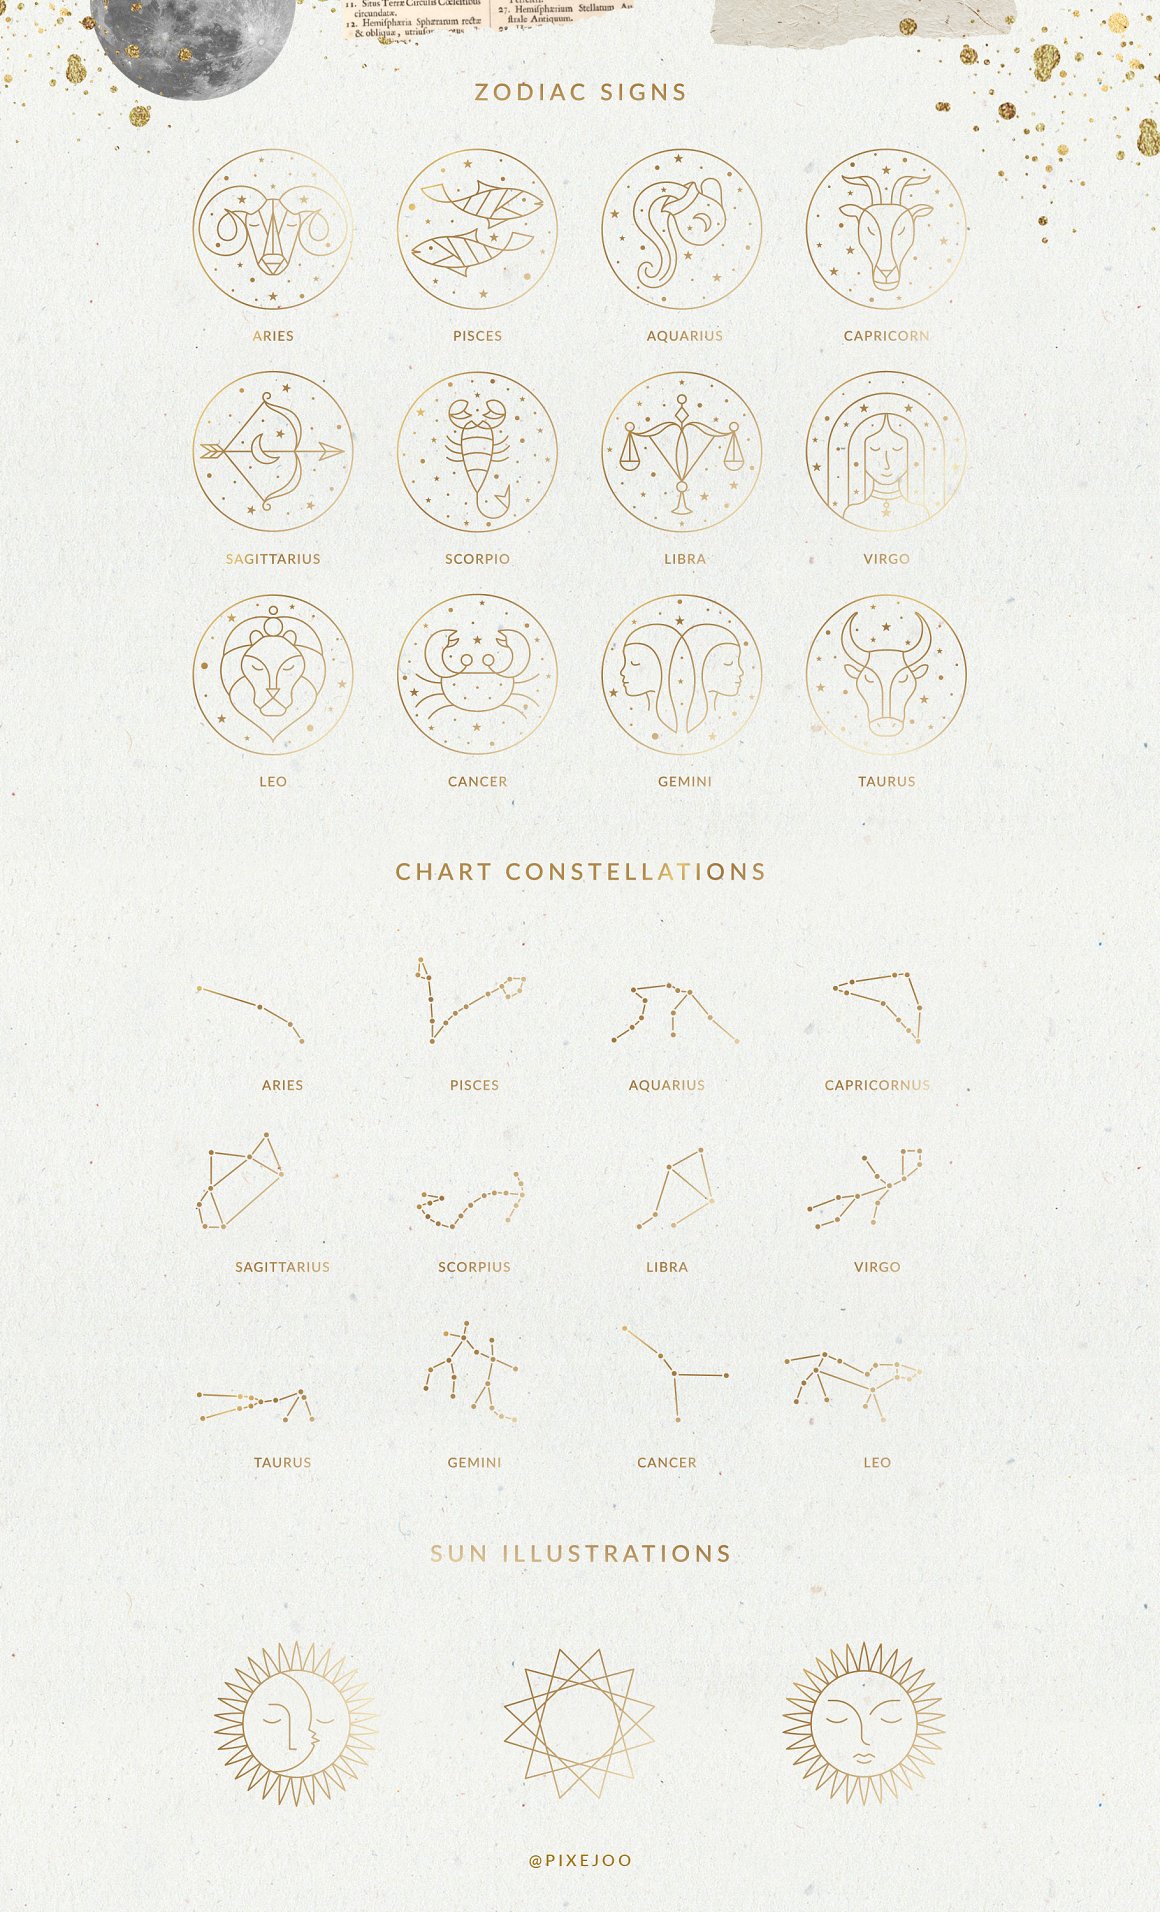 A golden set of zodiac signs, chart constellations and sun illustrations on a gray background.